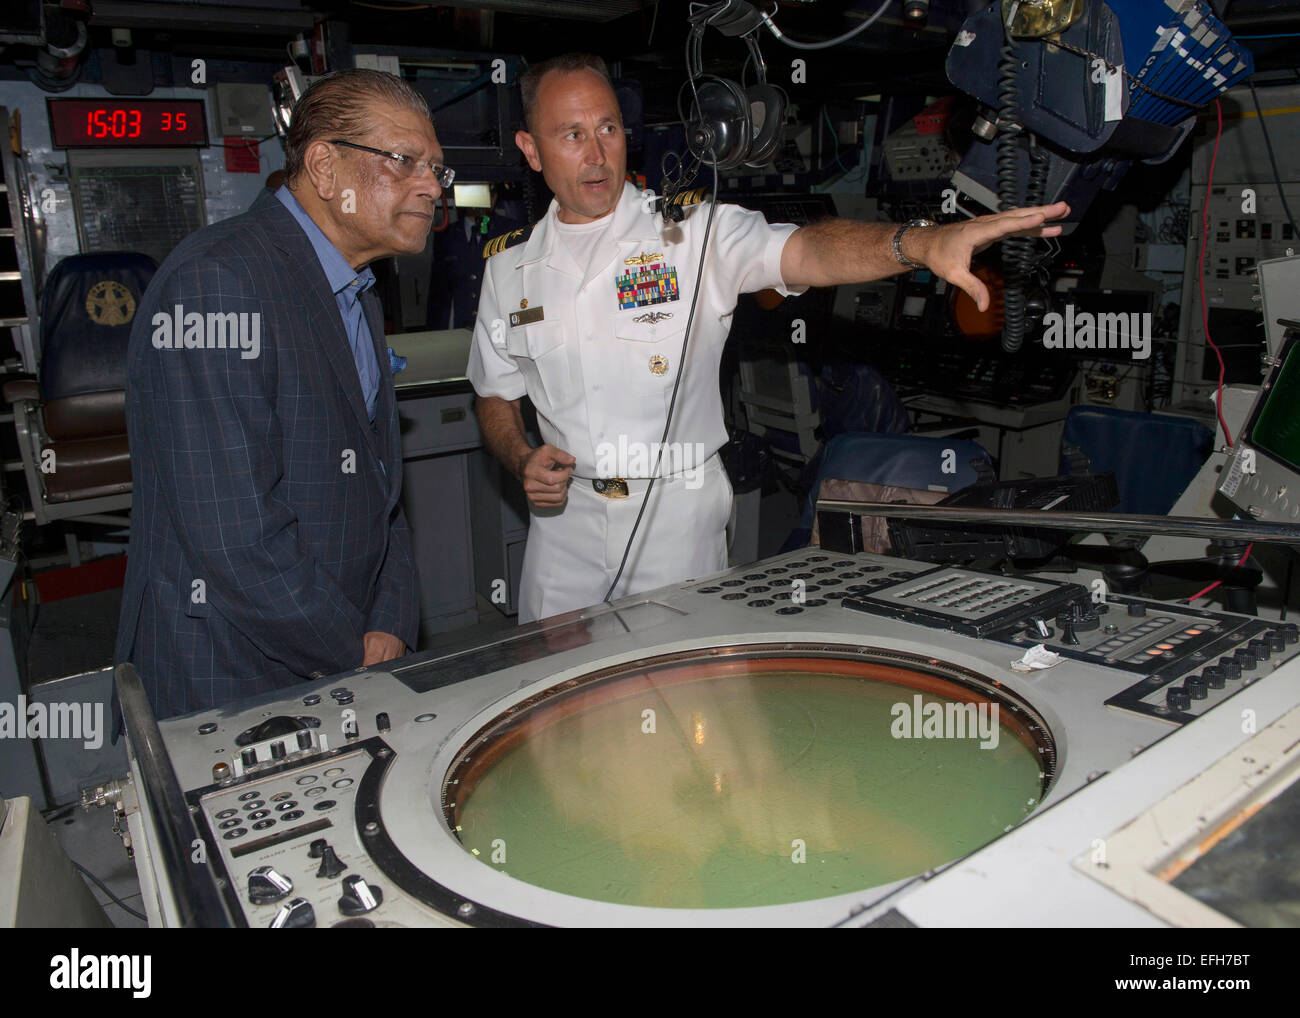 US Navy Cmdr. Ken Anderson gives a guided tour of his ship to Mauritius President Kailash Purryag aboard the Oliver Hazard Perry-class guided-missile frigate USS Simpson February 3, 2015 in Port Louis, Mauritius. Purryag visited the Simpson while it is in port during Exercise Cutlass Express 2015. Stock Photo